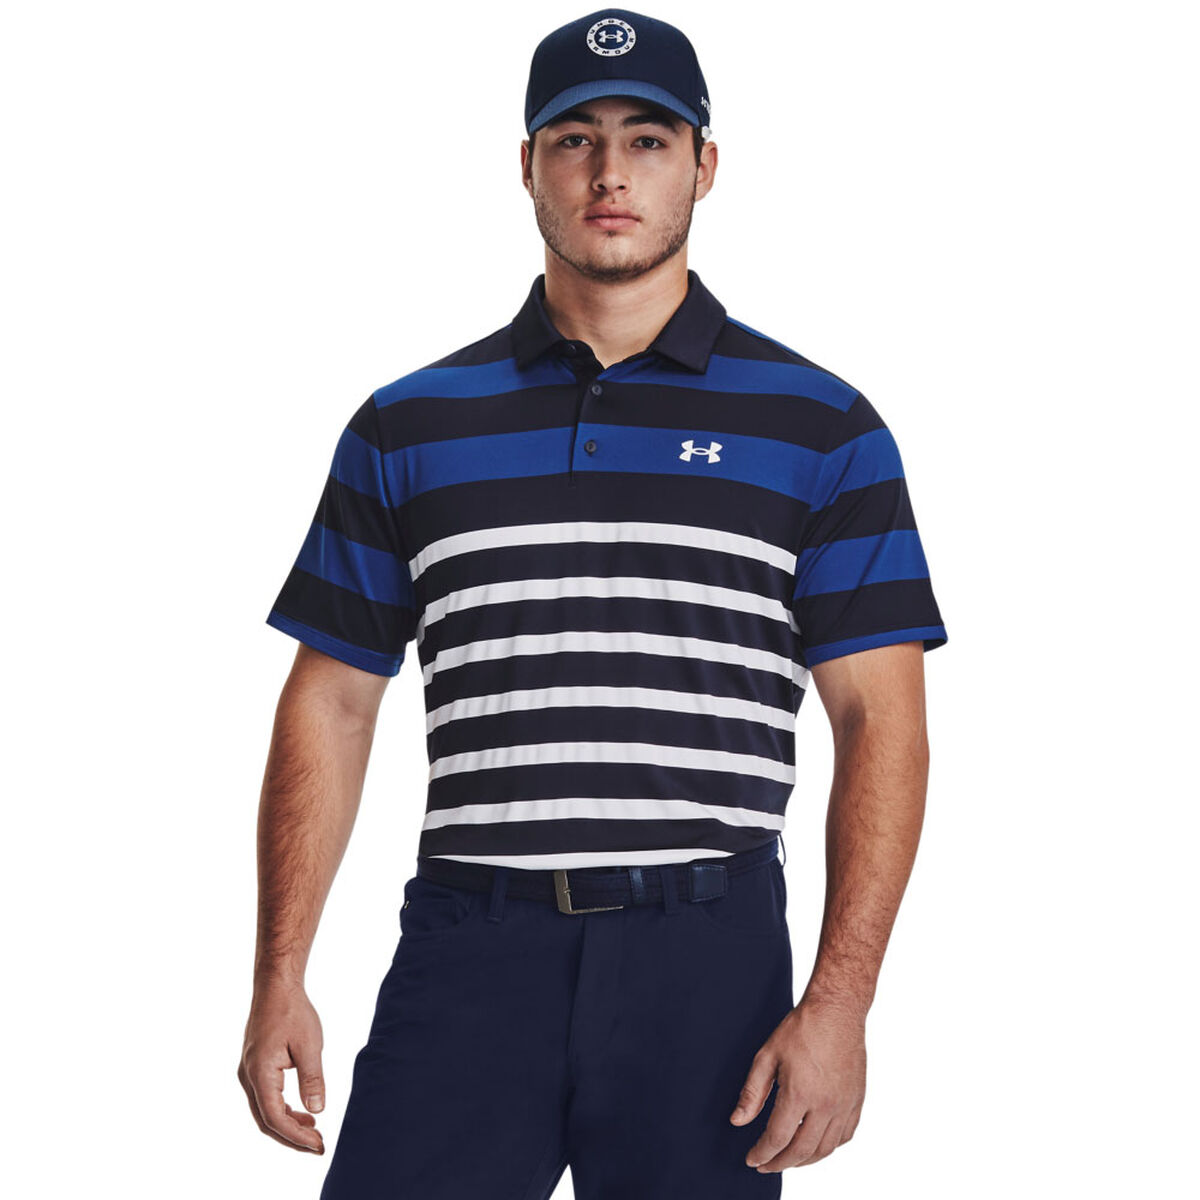 Under Armour Men’s Navy Blue and White Playoff 3.0 Rugby YD Stripe Golf Polo Shirt, Size: M | American Golf